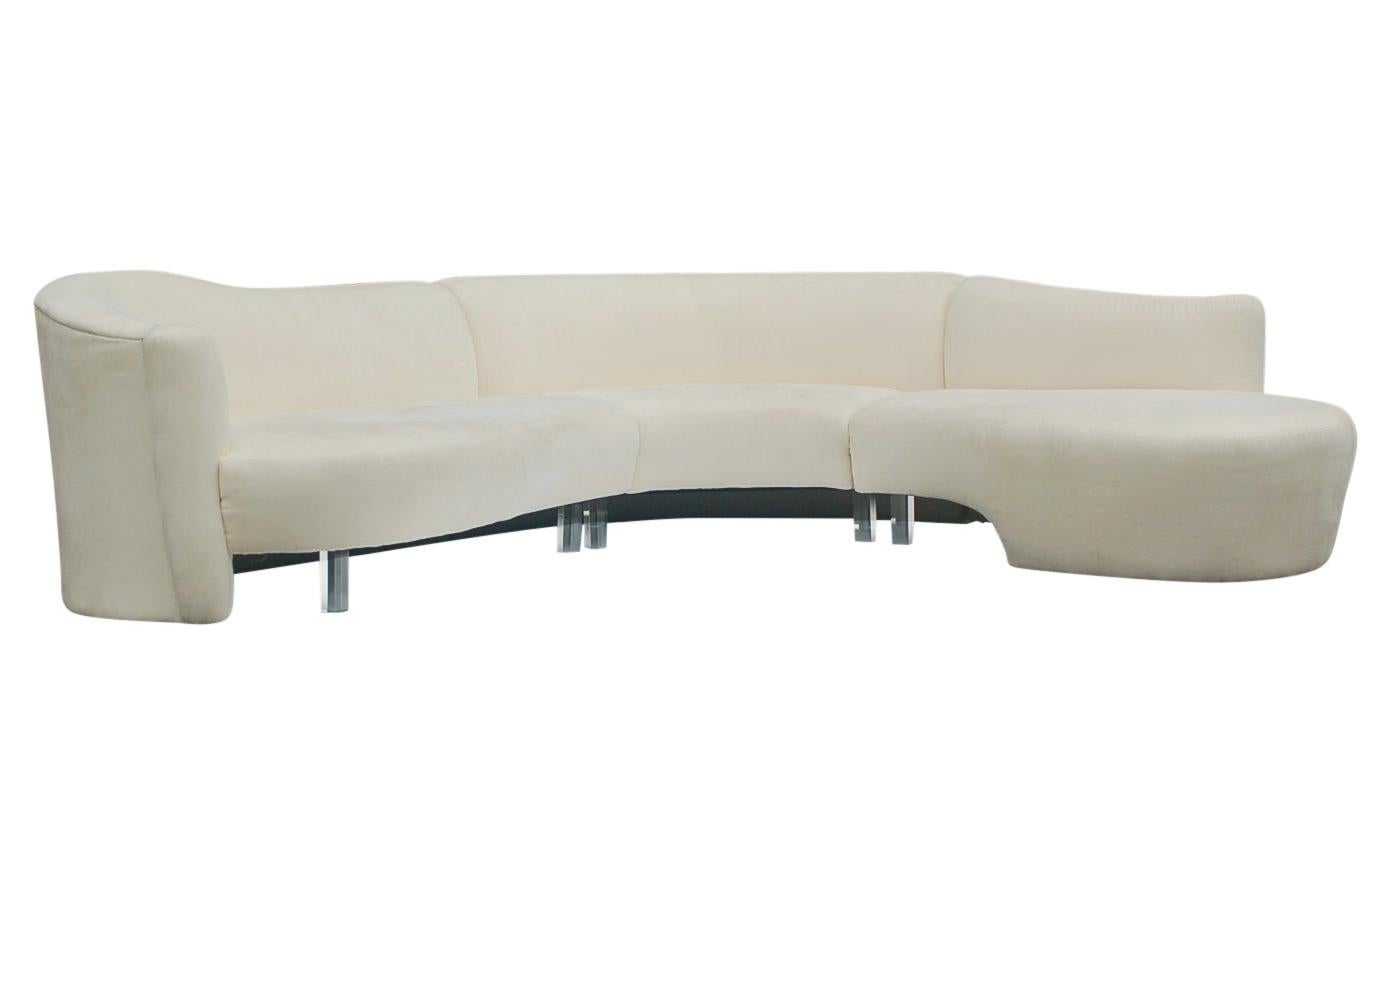 Late 20th Century Mid-Century Modern White Serpentine Sectional Sofa by Weiman